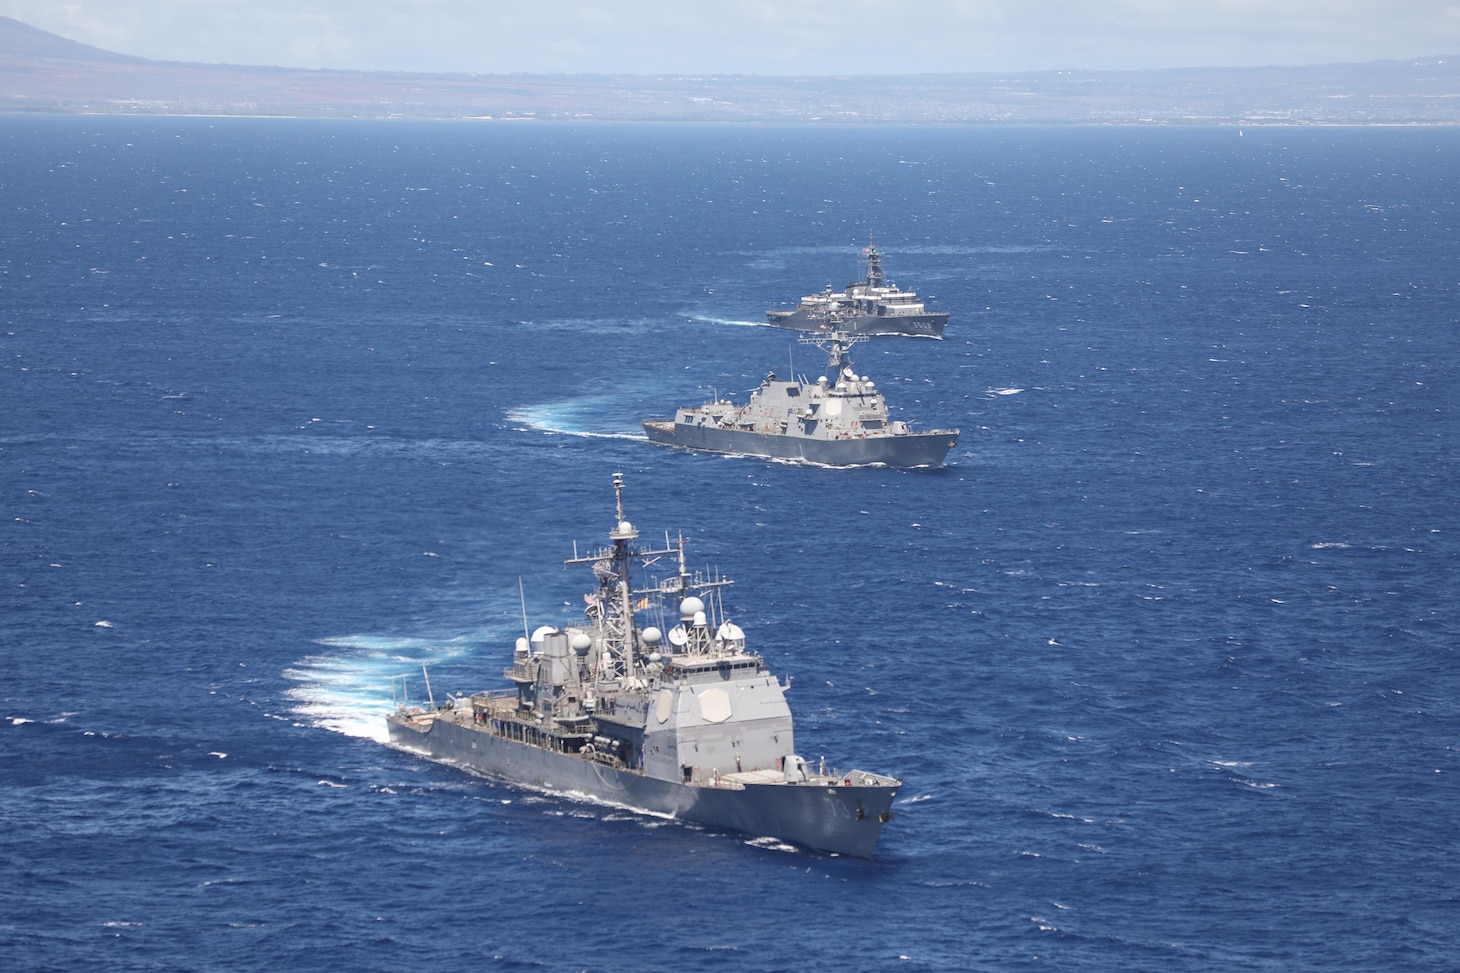 iconderoga-class guided-missile cruiser USS Port Royal (CG 73), Arleigh-Burke class guided-missile destroyer USS Wayne E. Meyer (DDG 108) and Japan Maritime Self-Defense Force (JMSDF) ship JS Kashima (TV-3508) participated in a Cooperative Deployment (CODEP).